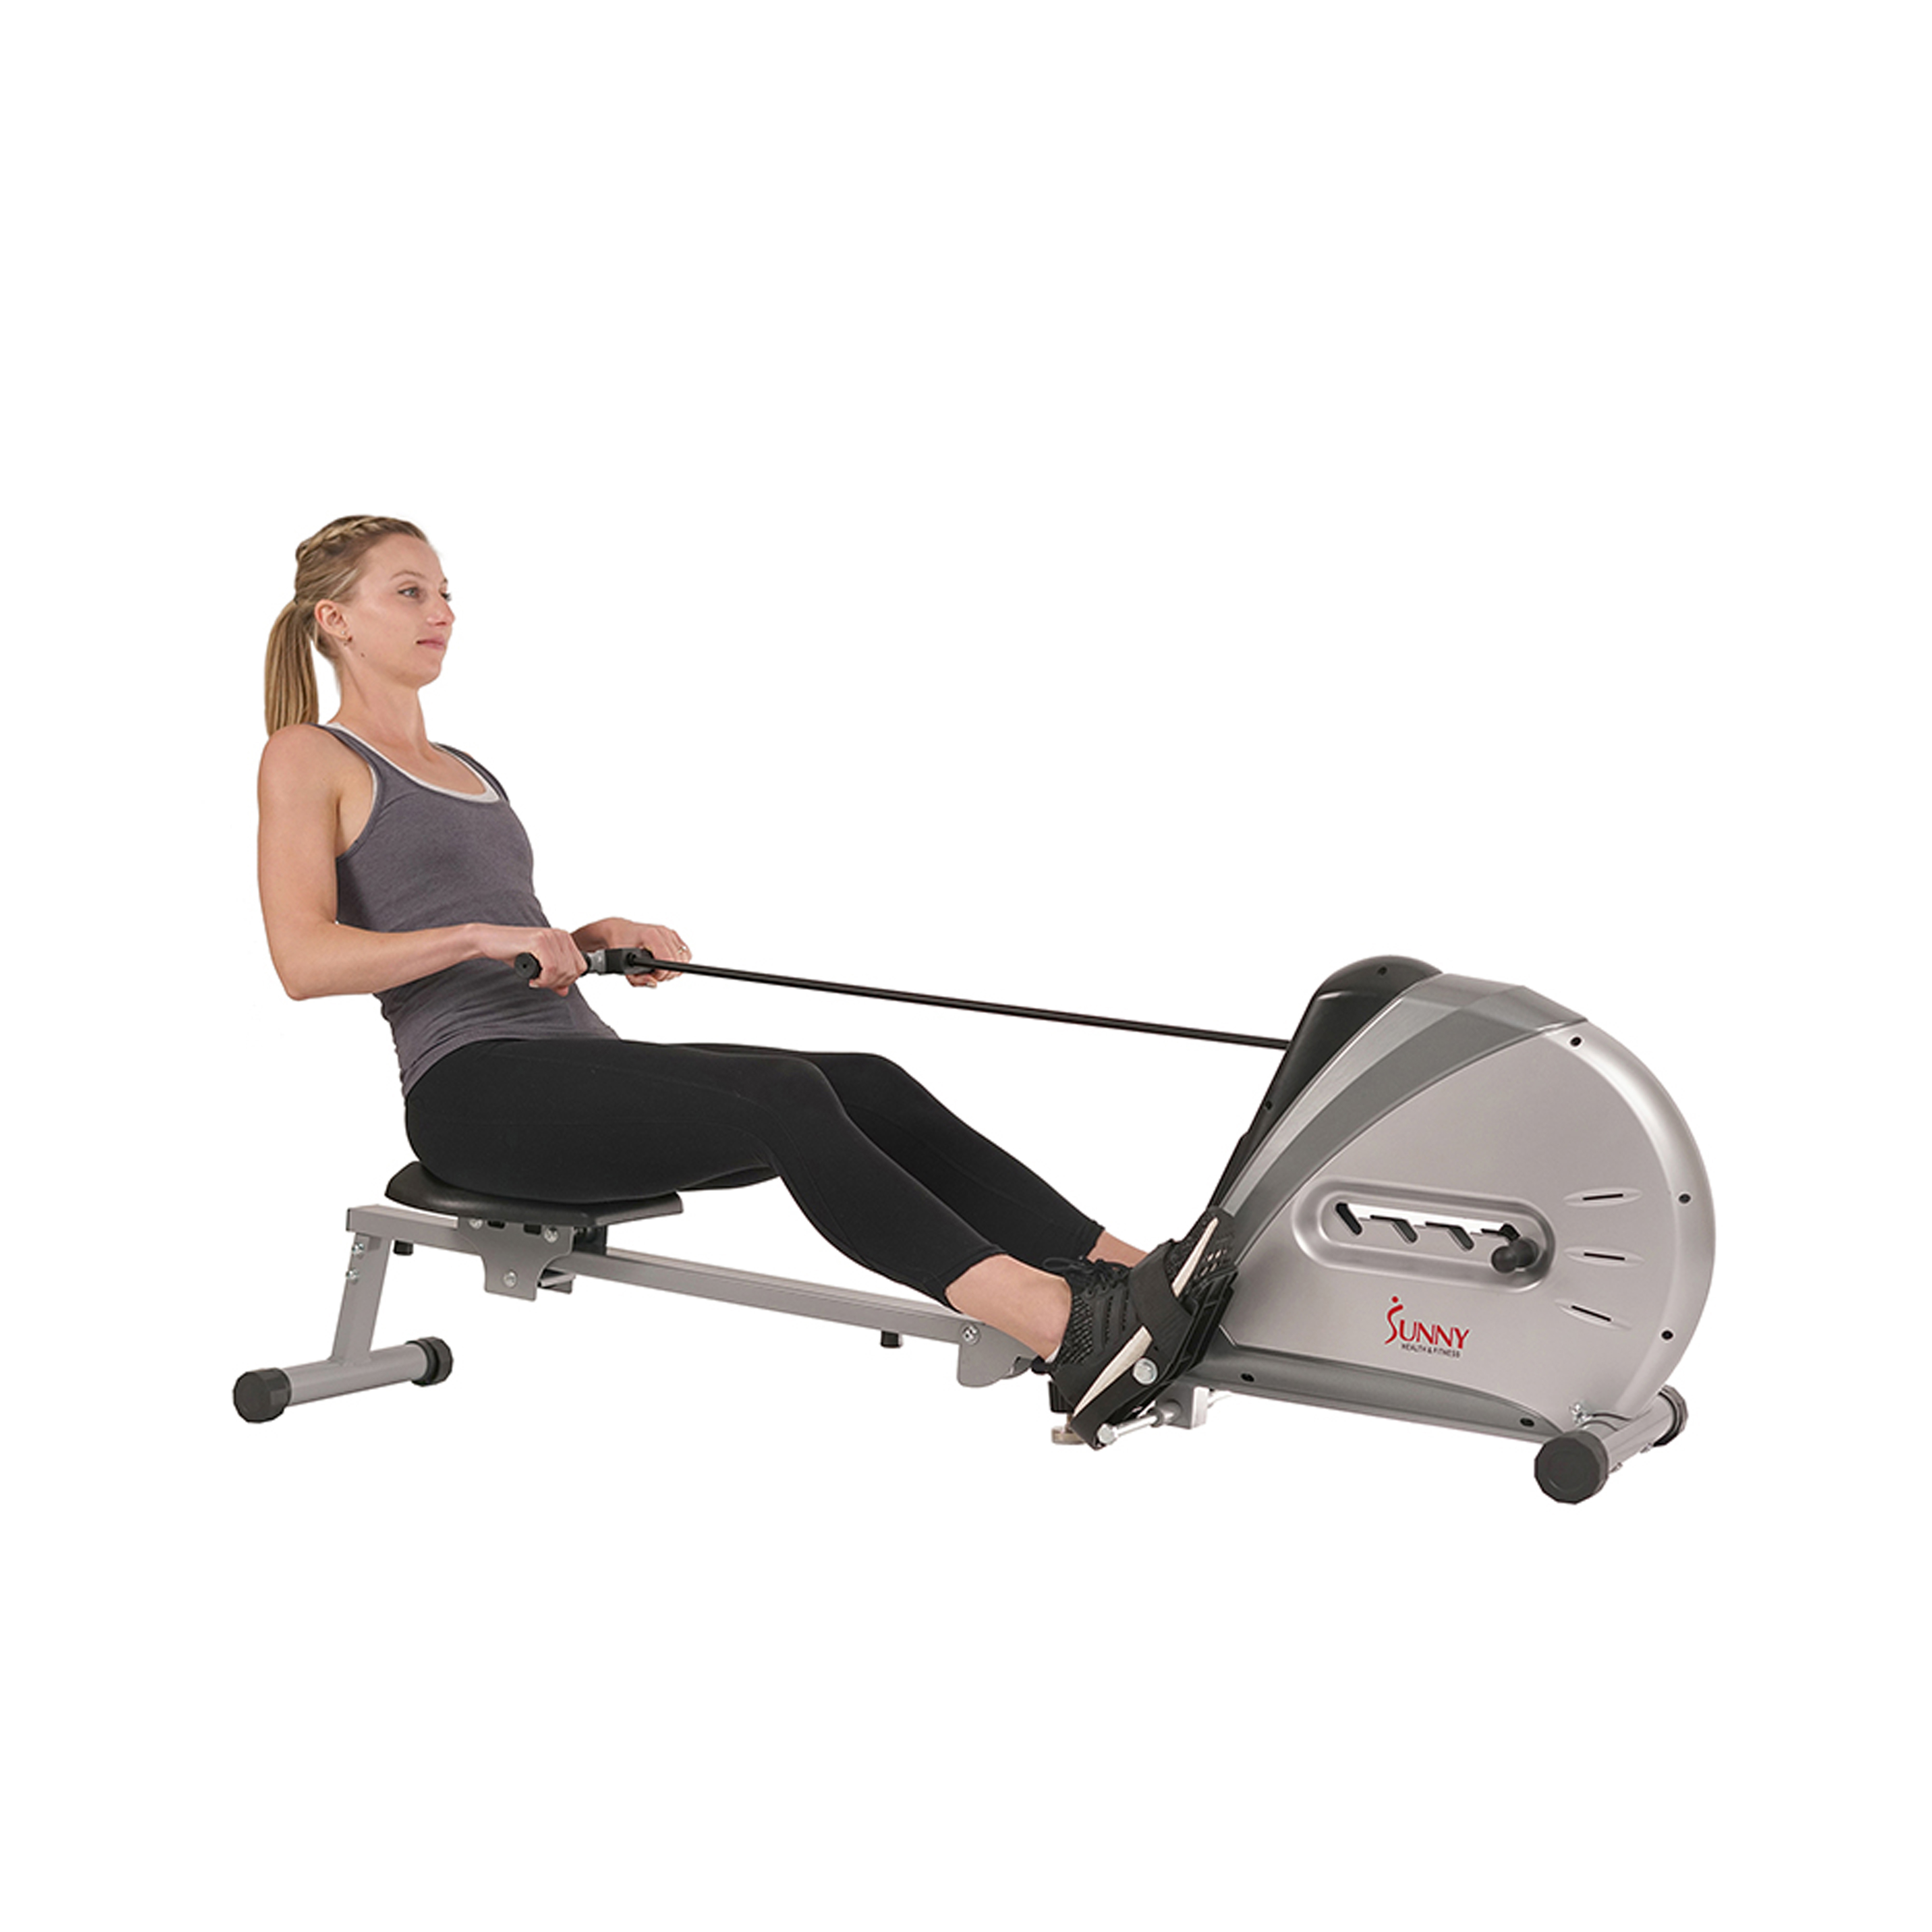 Sunny Health & Fitness Elastic Cord Rowing Machine Rower with LCD Monitor for Full Body Gym Workouts at Home Exercise, SF-RW5606 - image 1 of 10